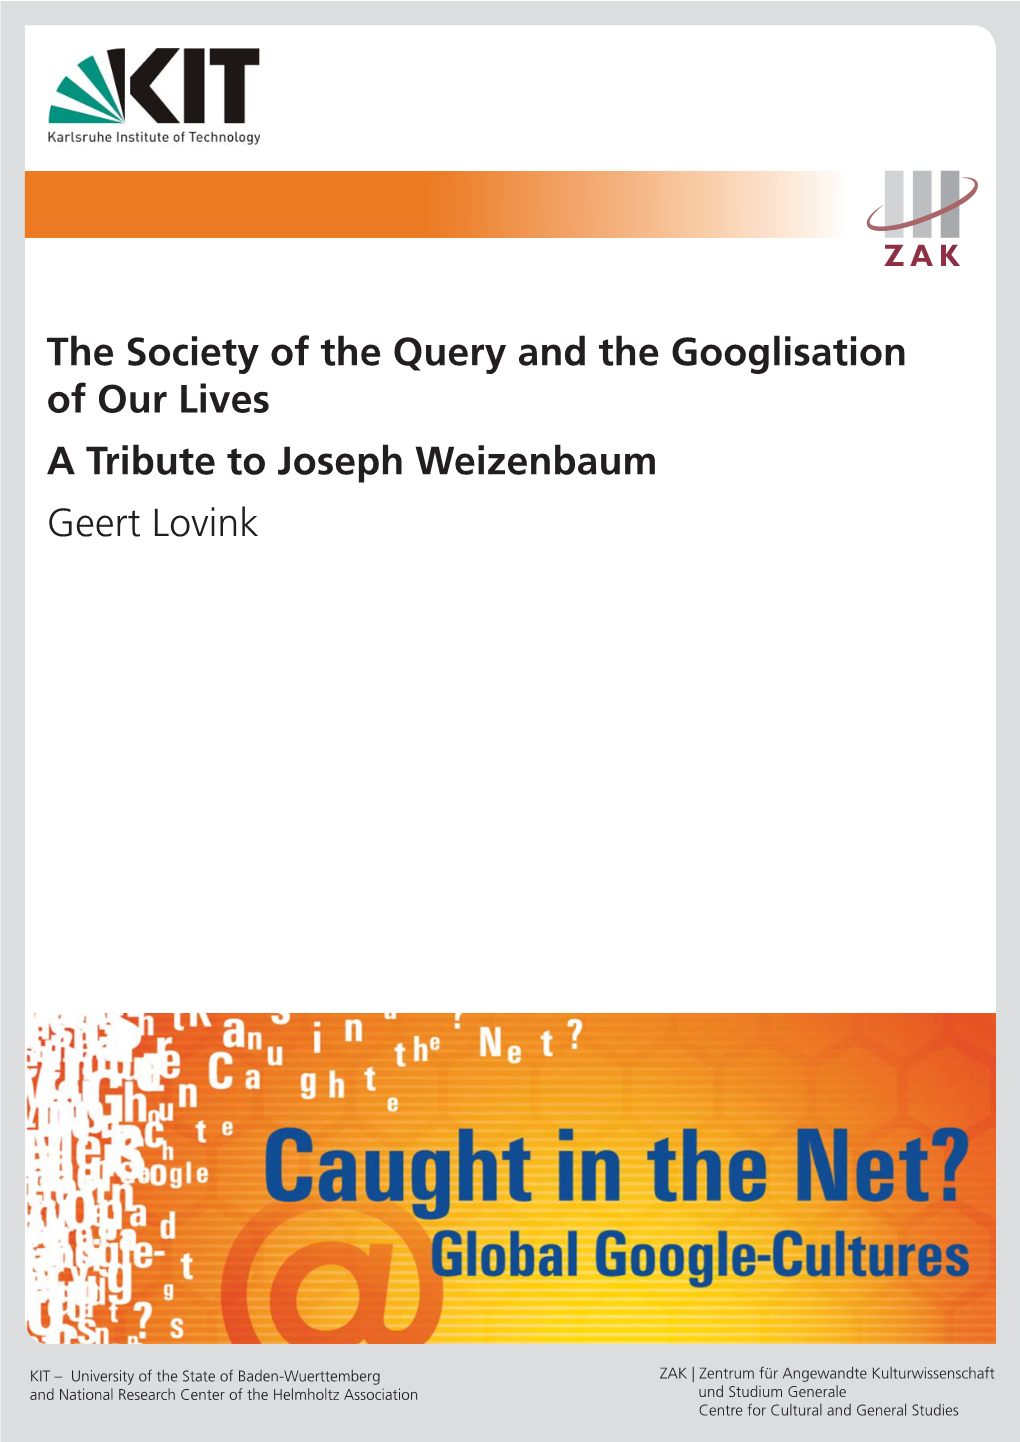 The Society of the Query and the Googlisation of Our Lives a Tribute to Joseph Weizenbaum Geert Lovink